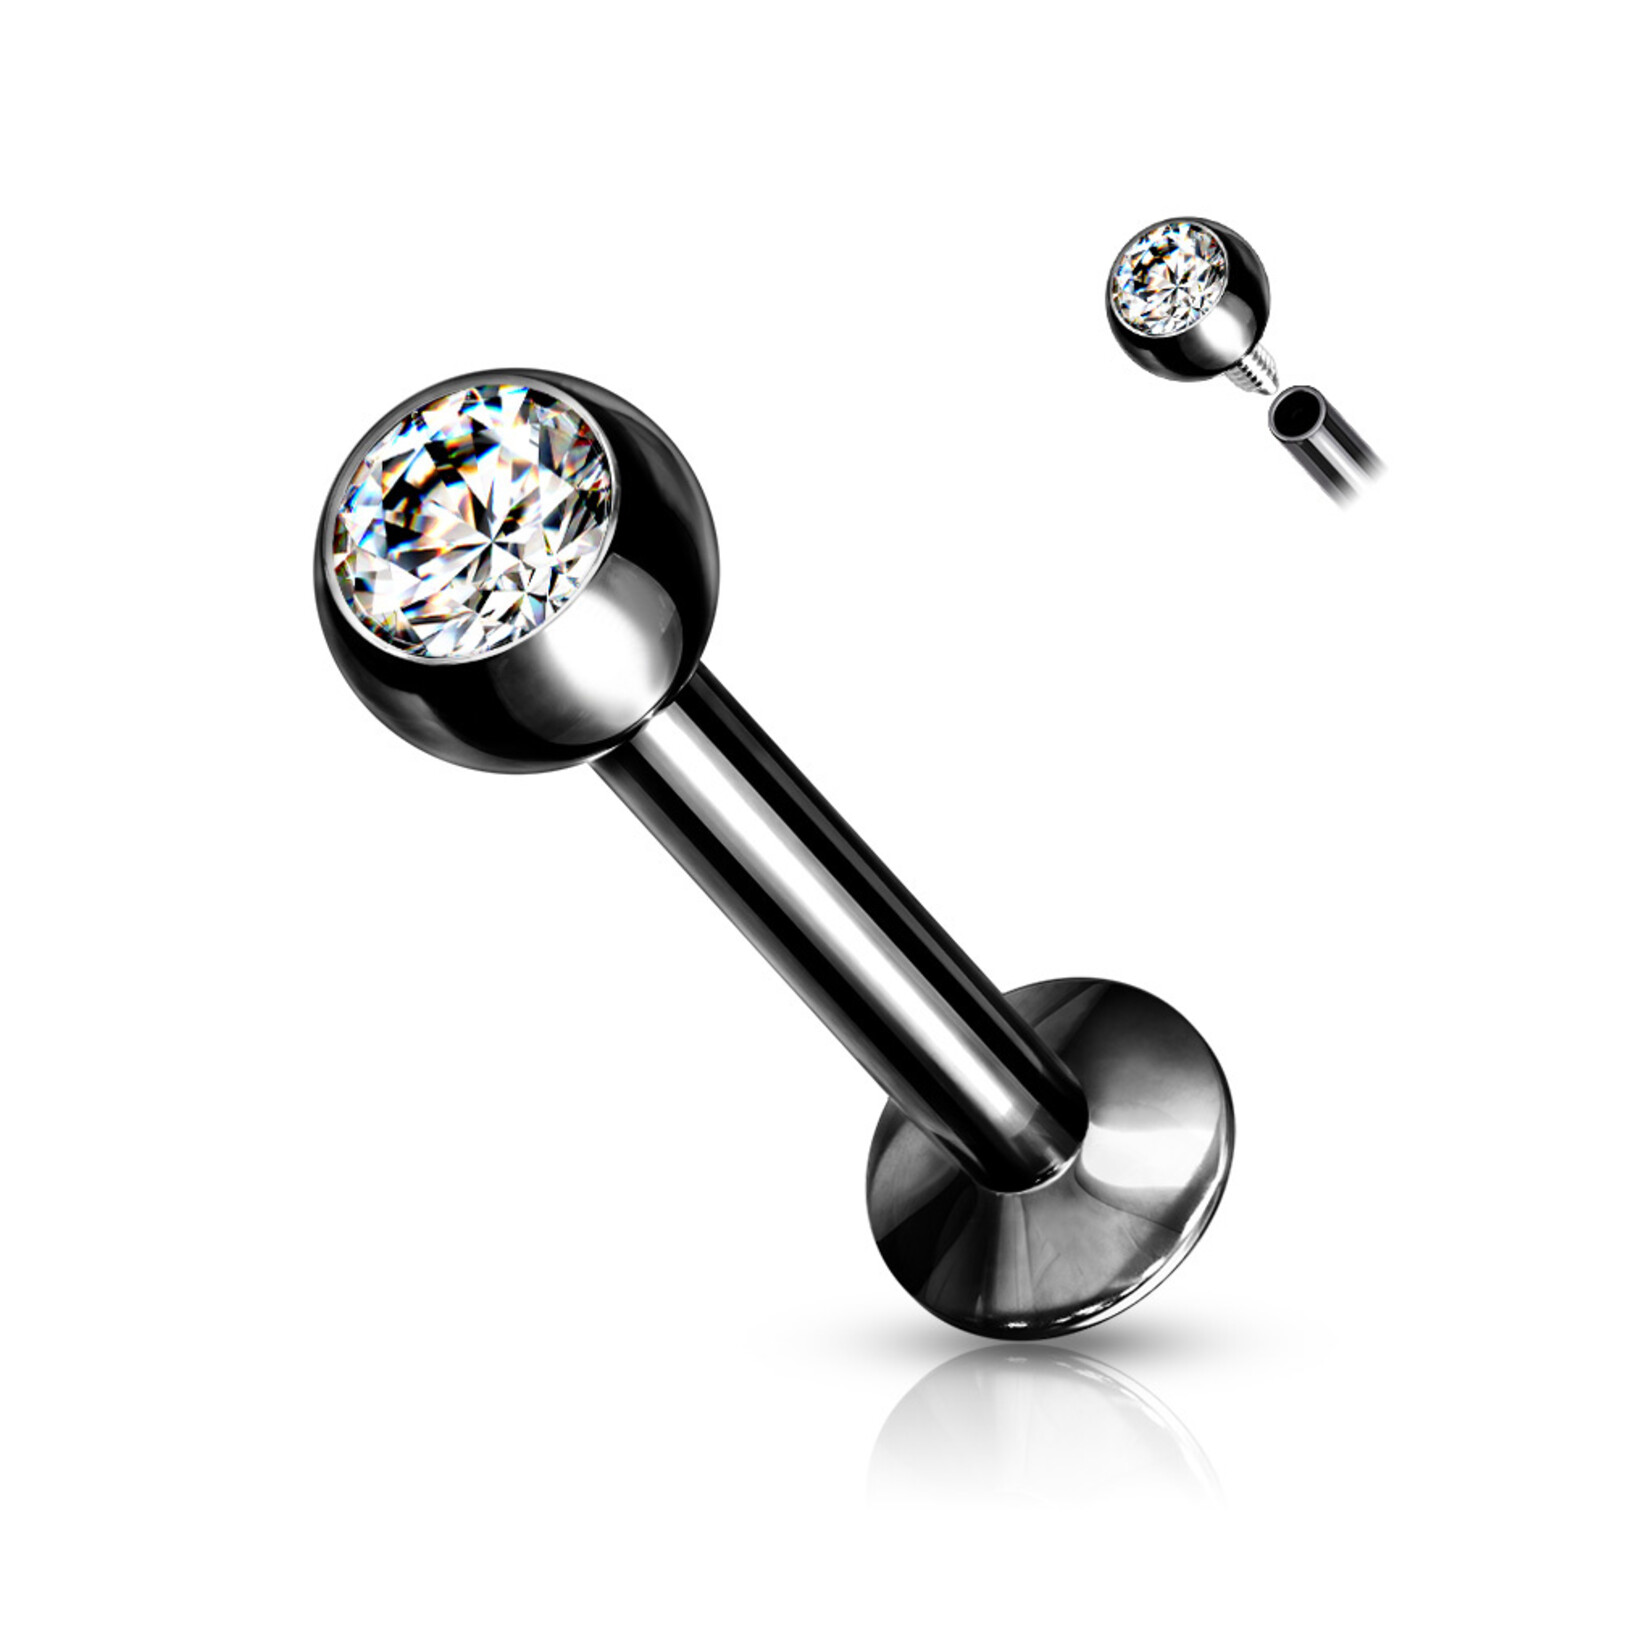 Hollywood Body Jewelry Press Fit Gem Ball Labret